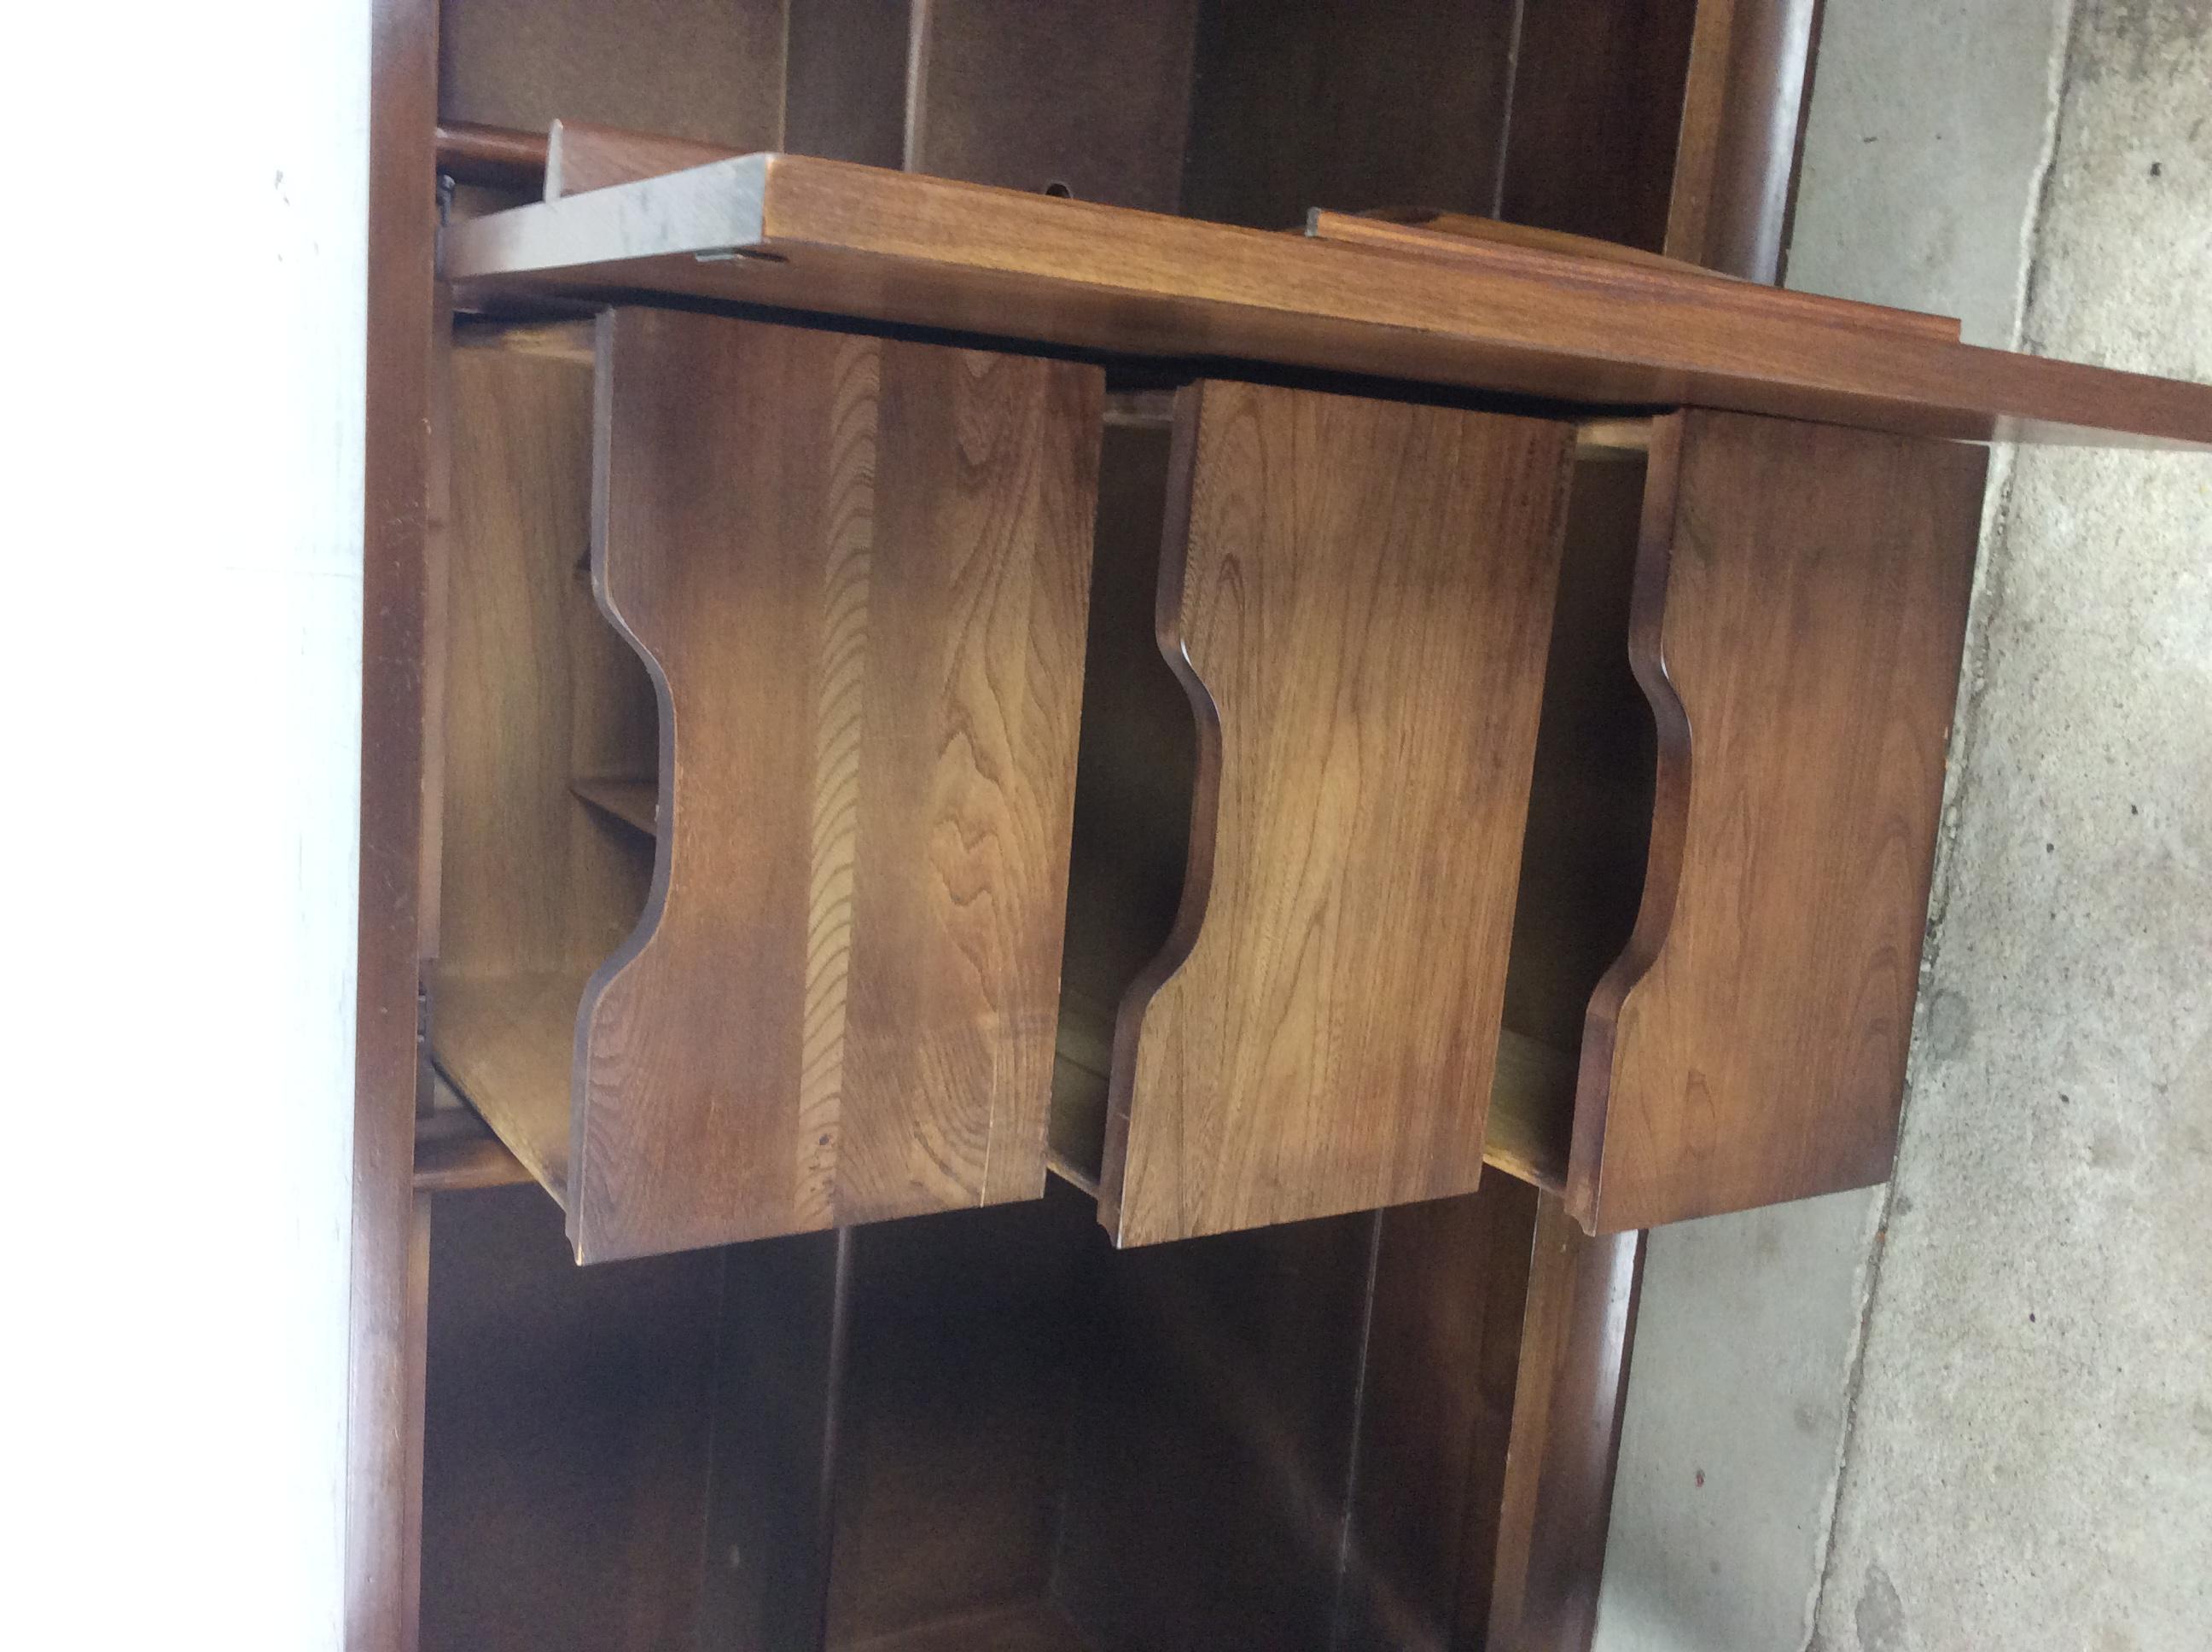 This Mid-Century Modern china cabinet from the 